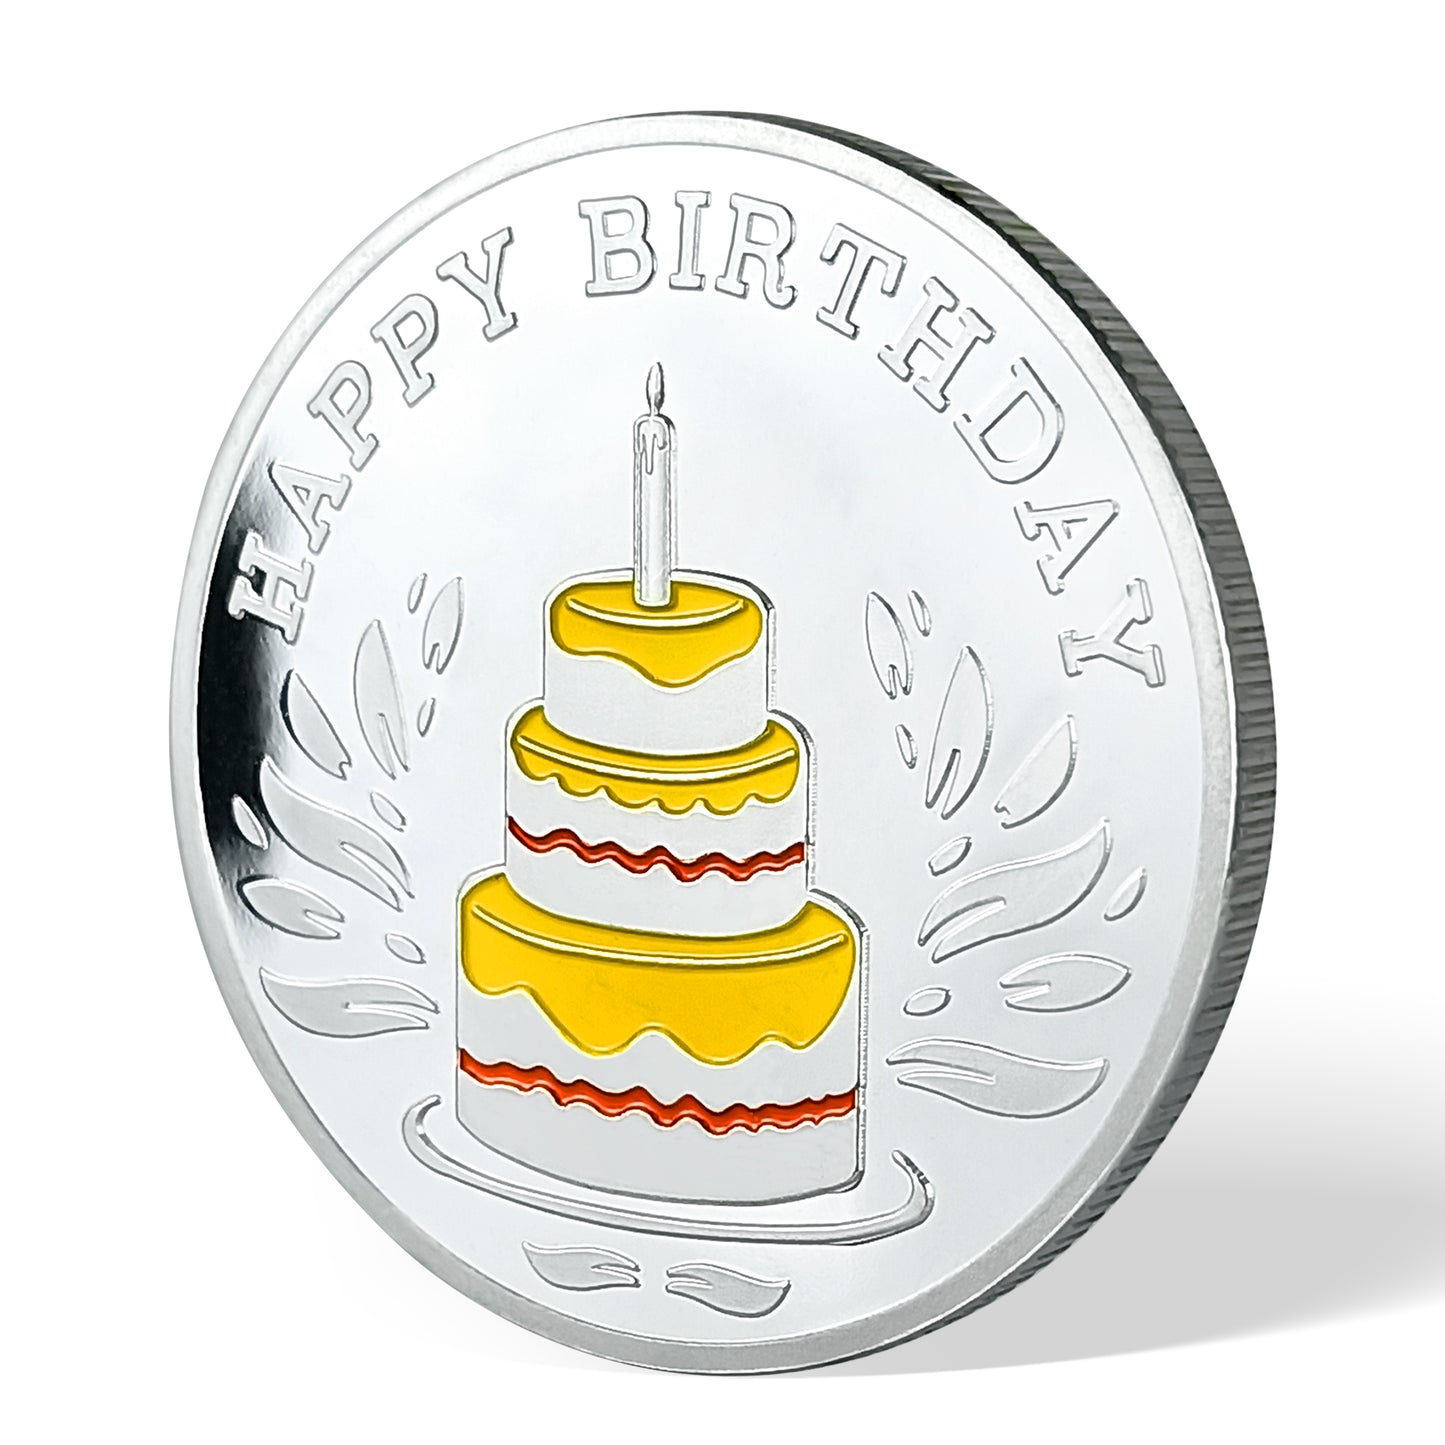 Happy Birthday Coin, Christian Birthday Gifts for Friends for Siblings, Grandson or Granddaughter, Boys & Girls, Lord Bless You, 40 Years,silver